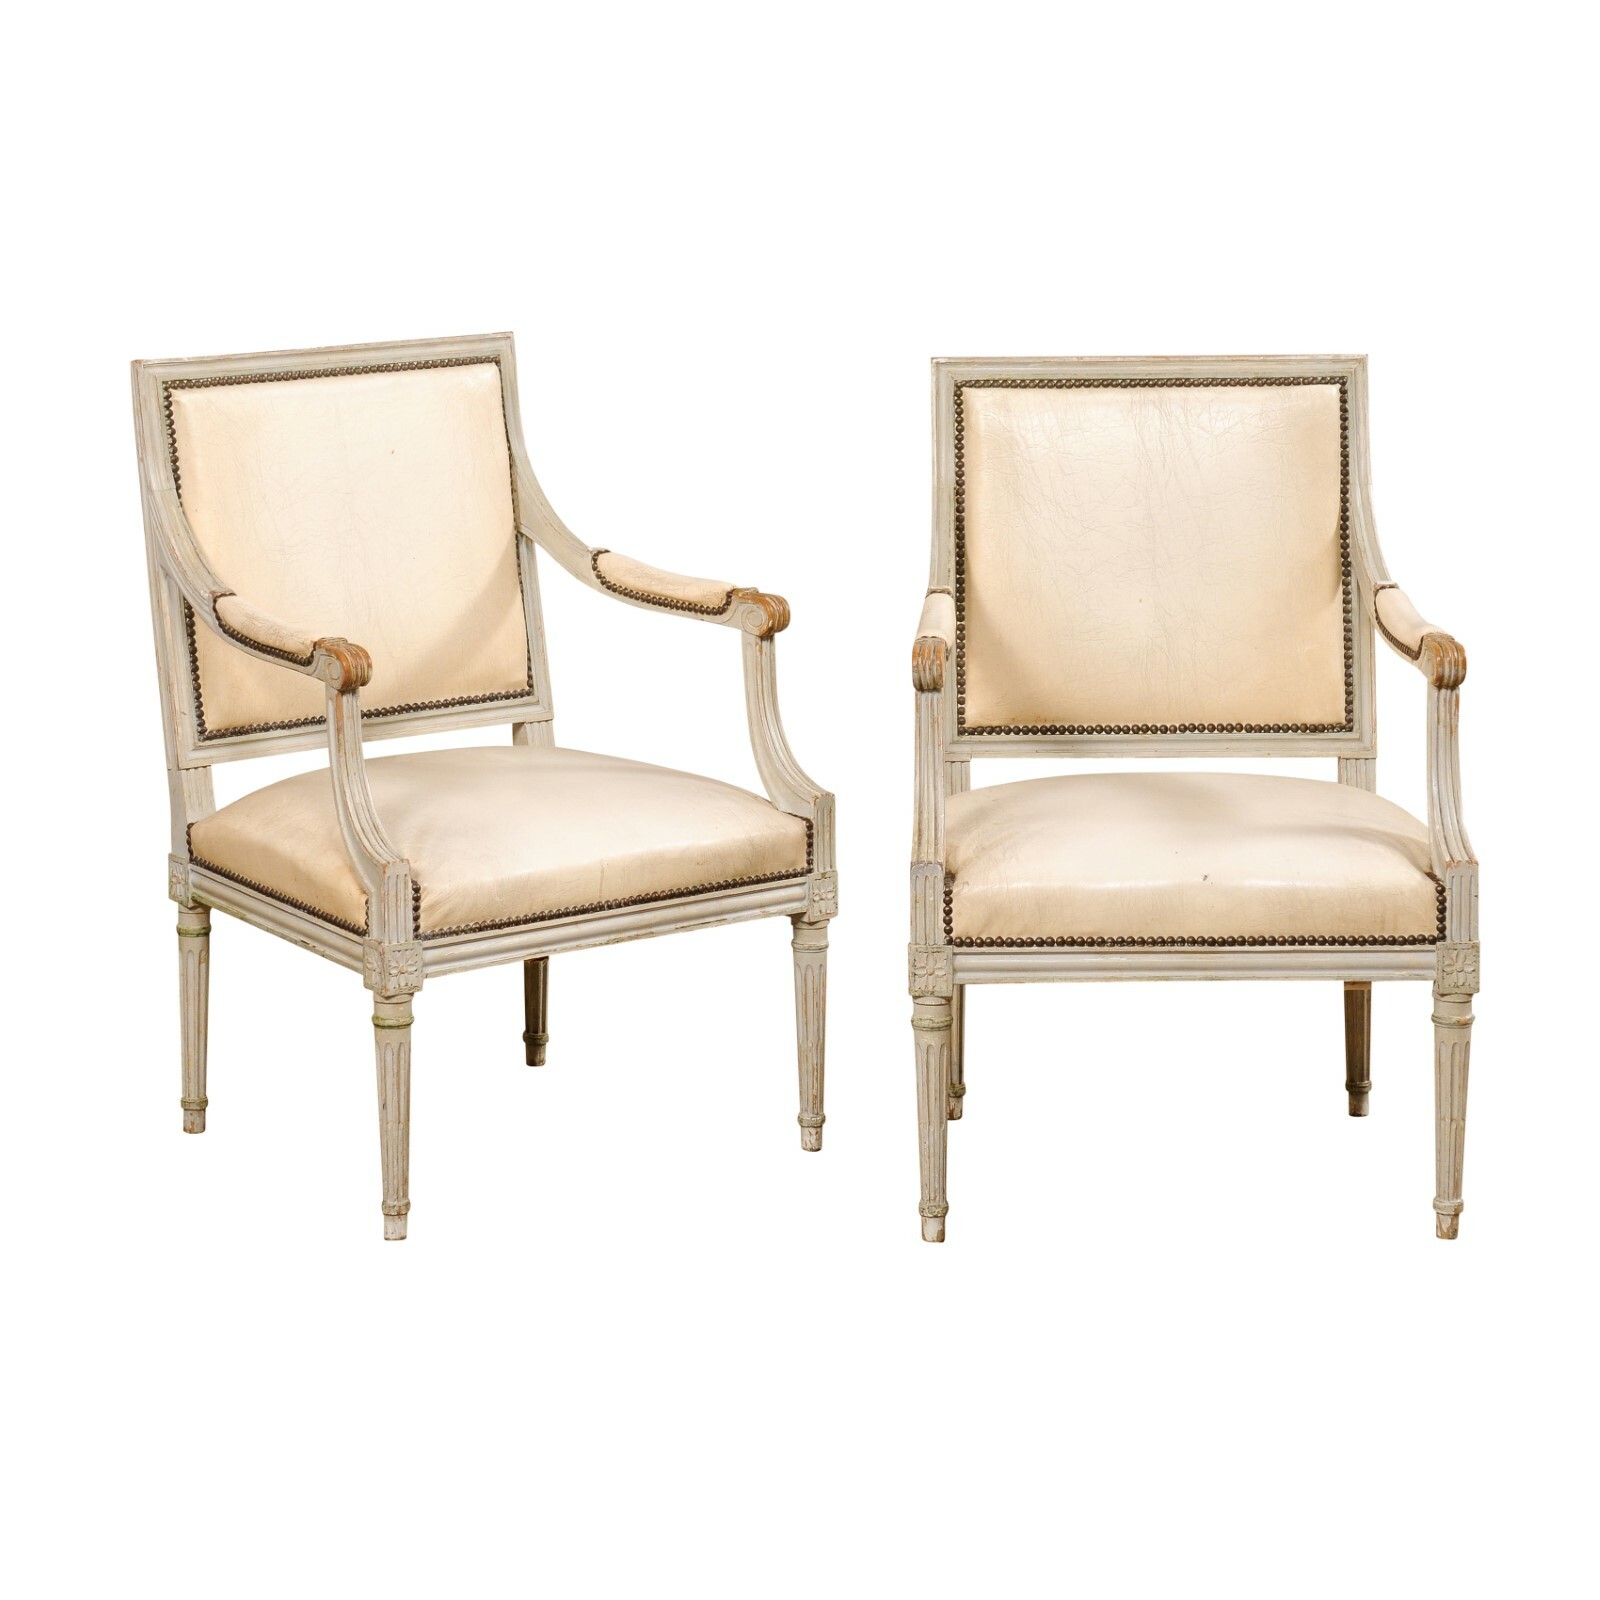 Antique French Louis XVI Style Armchairs